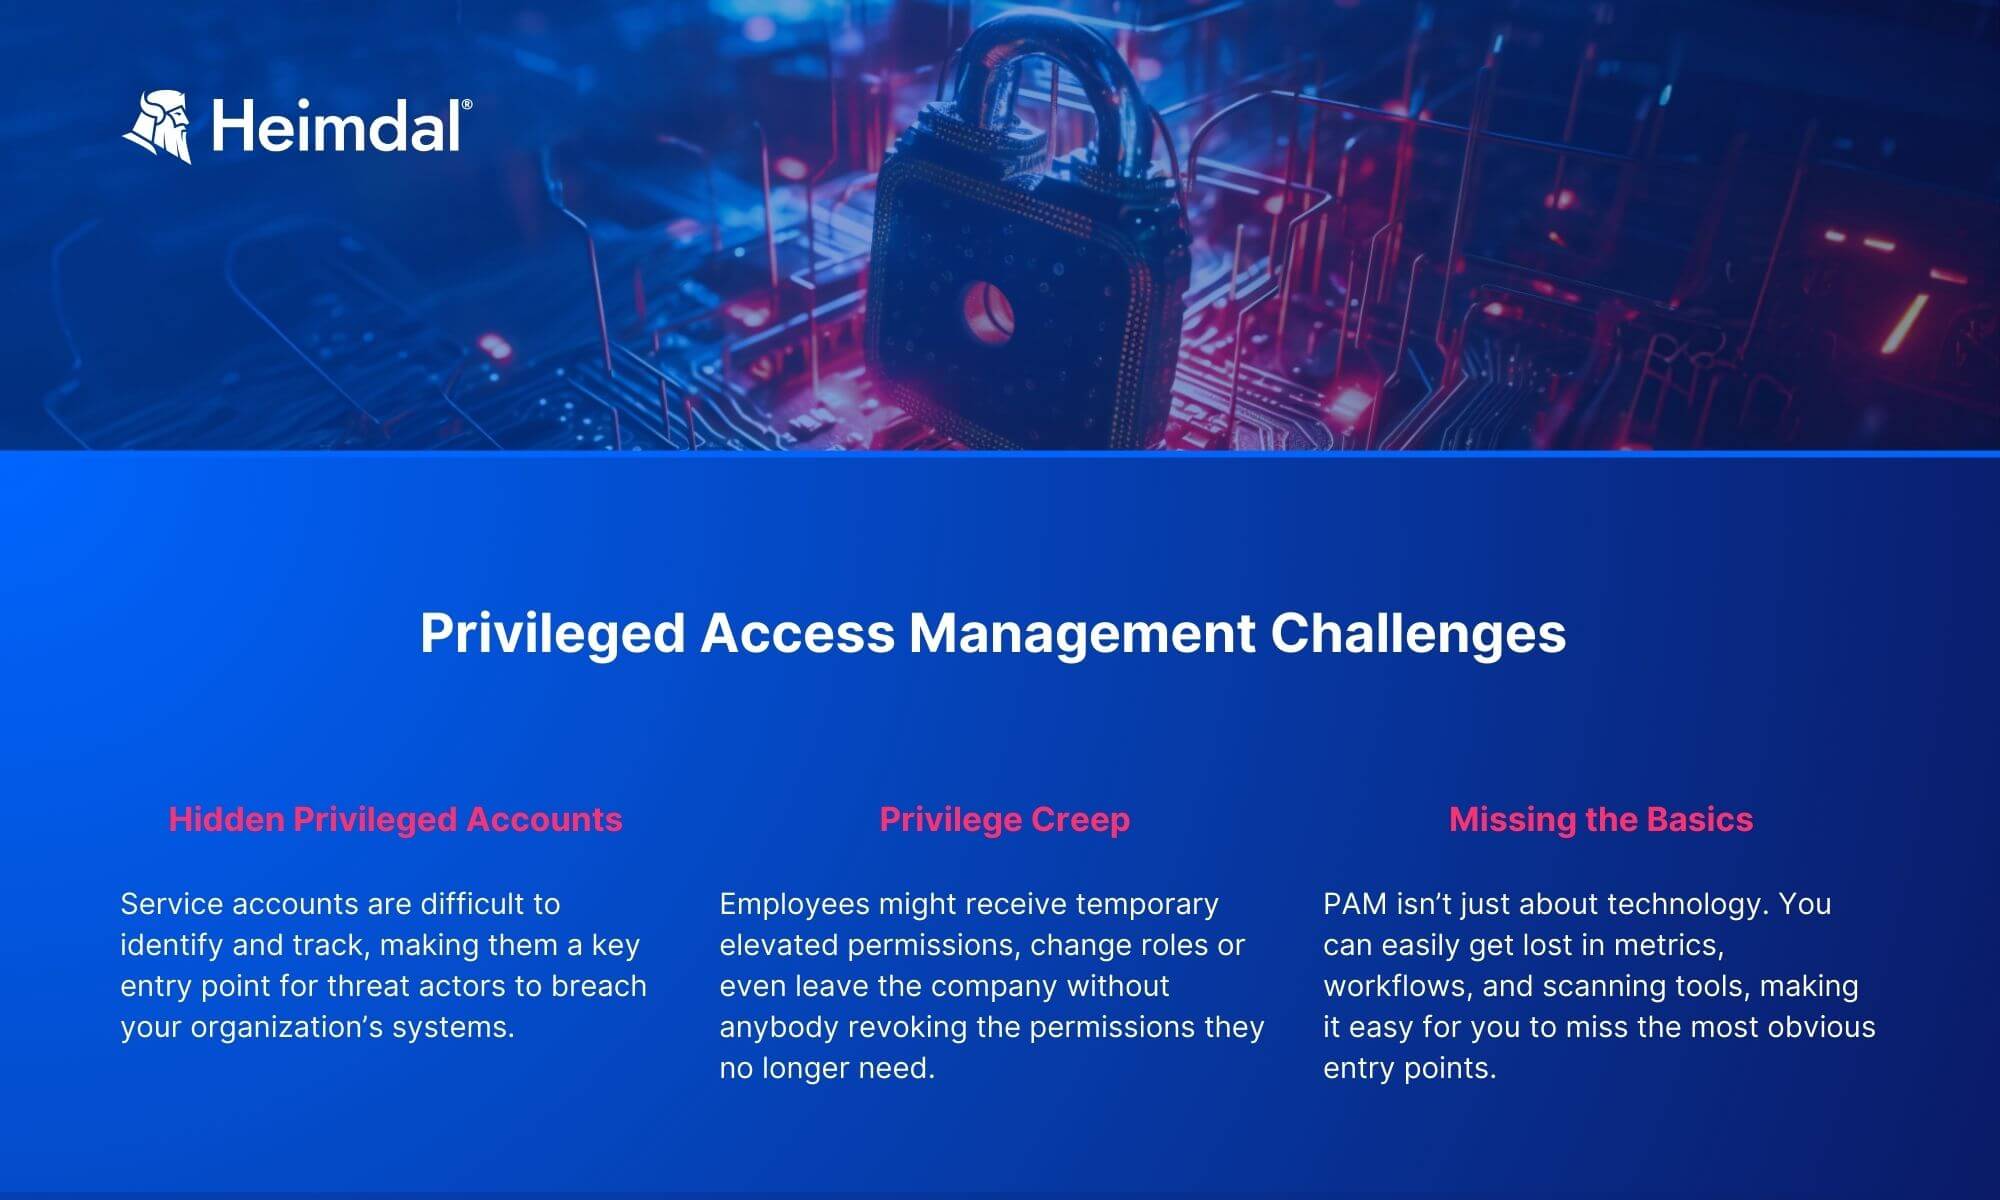 Cybersecurity infographic presenting the main challenges associated with privileged access management